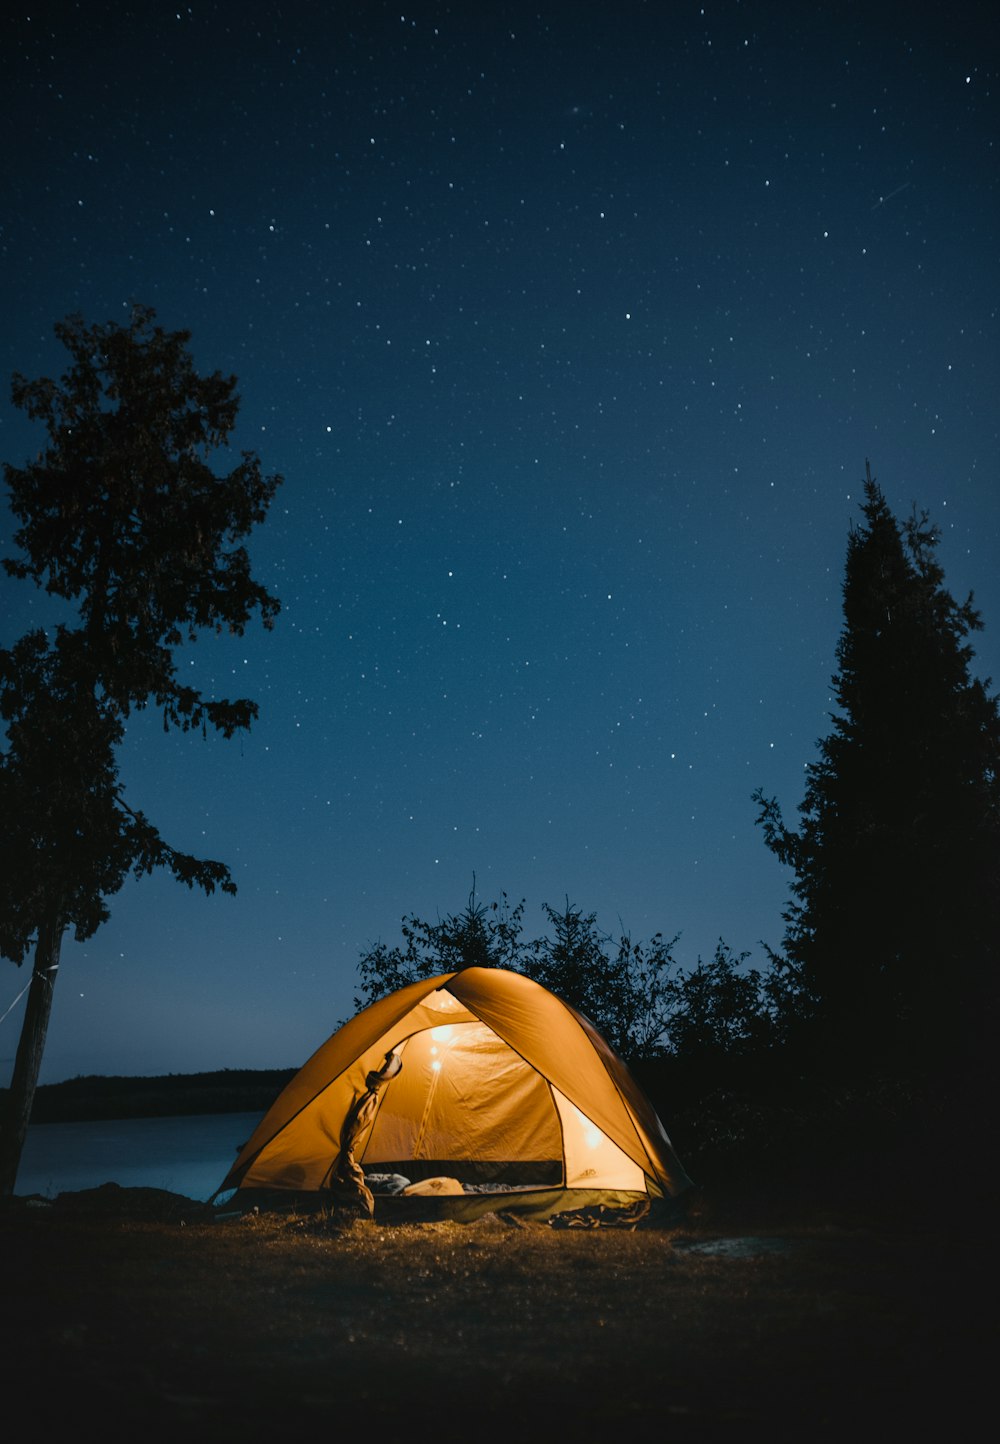 500+ Camping Images [HD] | Download